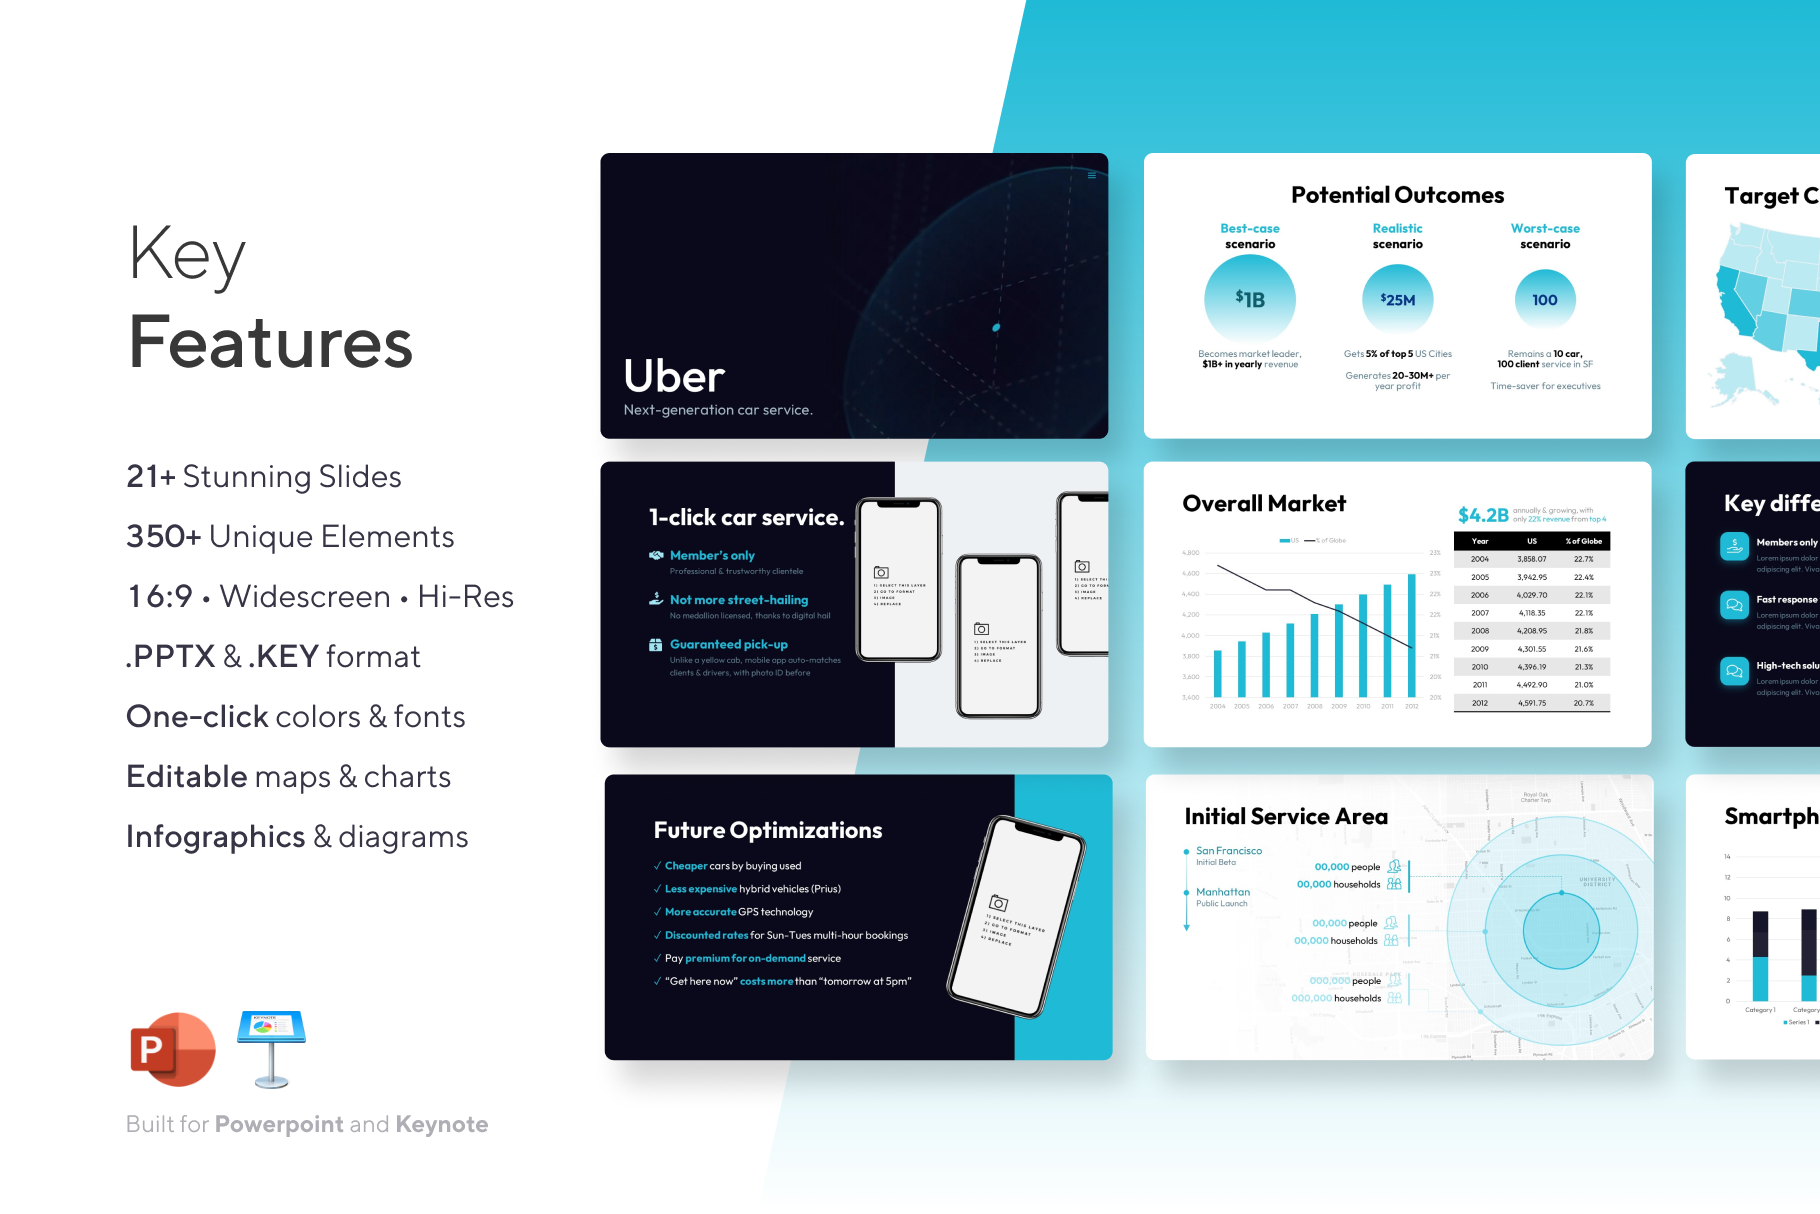 Uber Pitch Deck Template